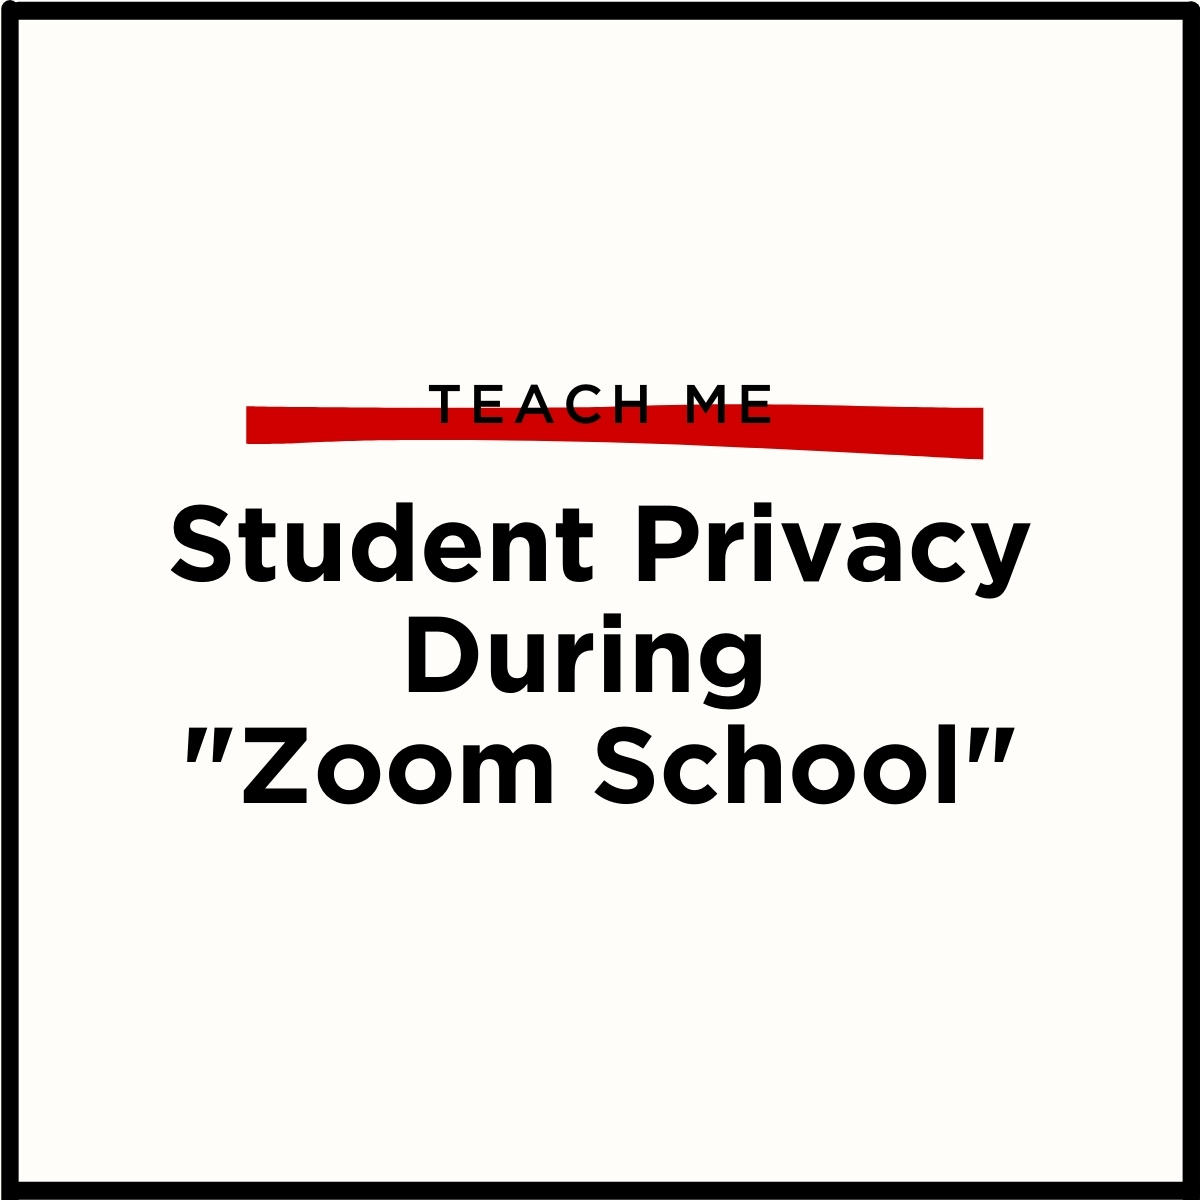 Text overlaid on a cream colored background. The text says Teach me, student privacy during 